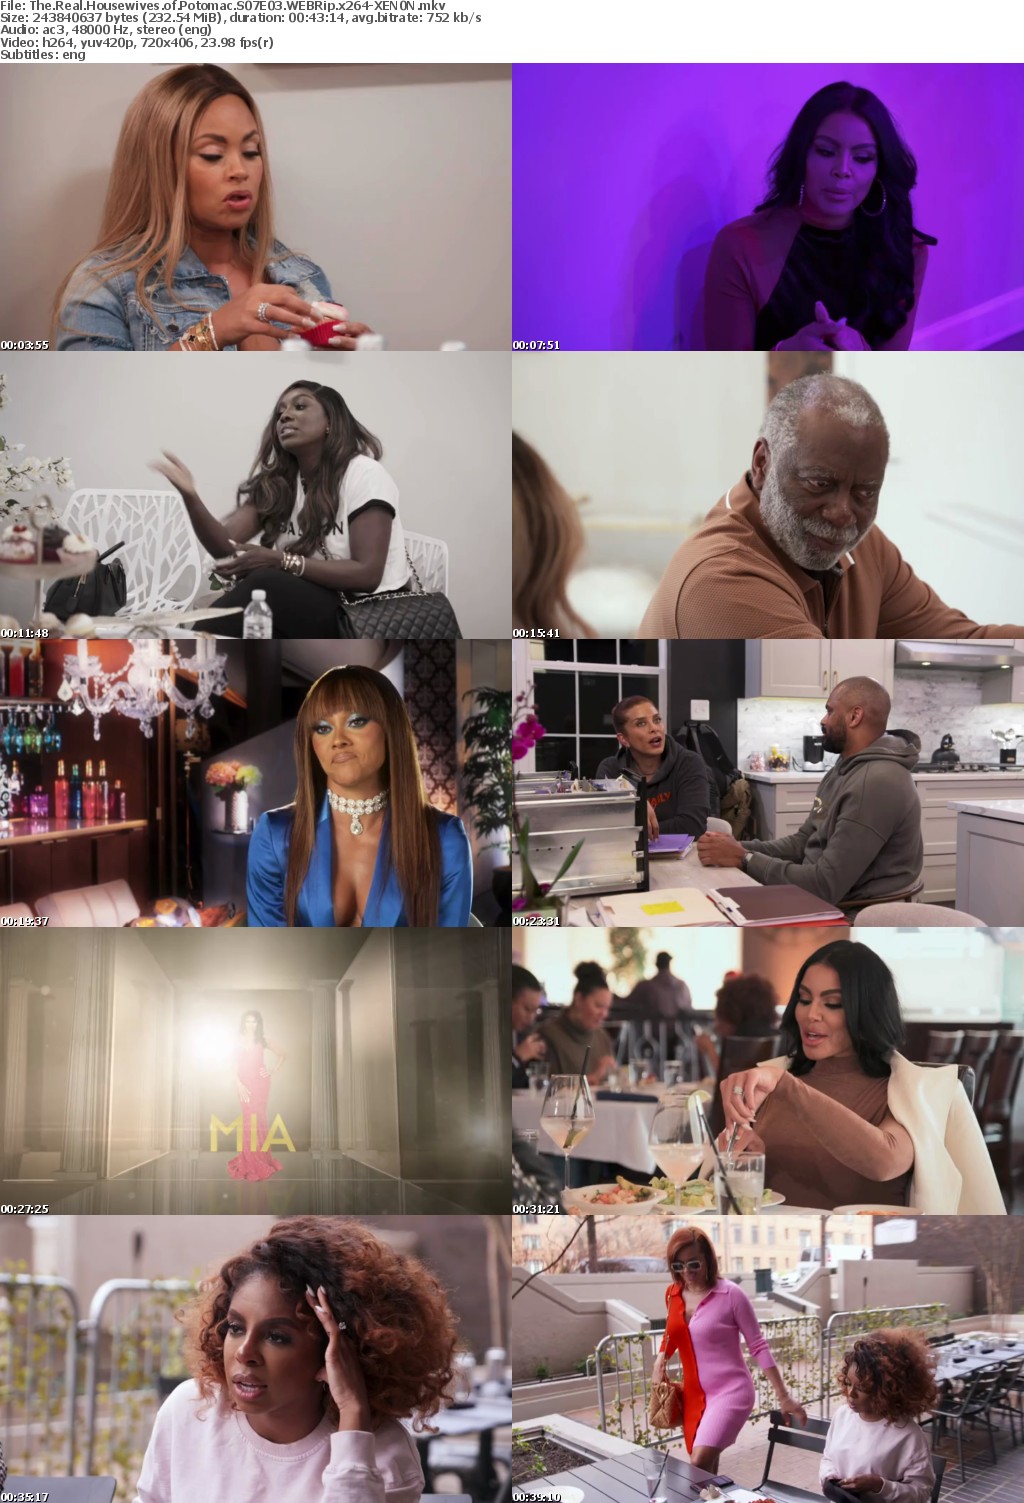 The Real Housewives of Potomac S07E03 WEBRip x264-XEN0N